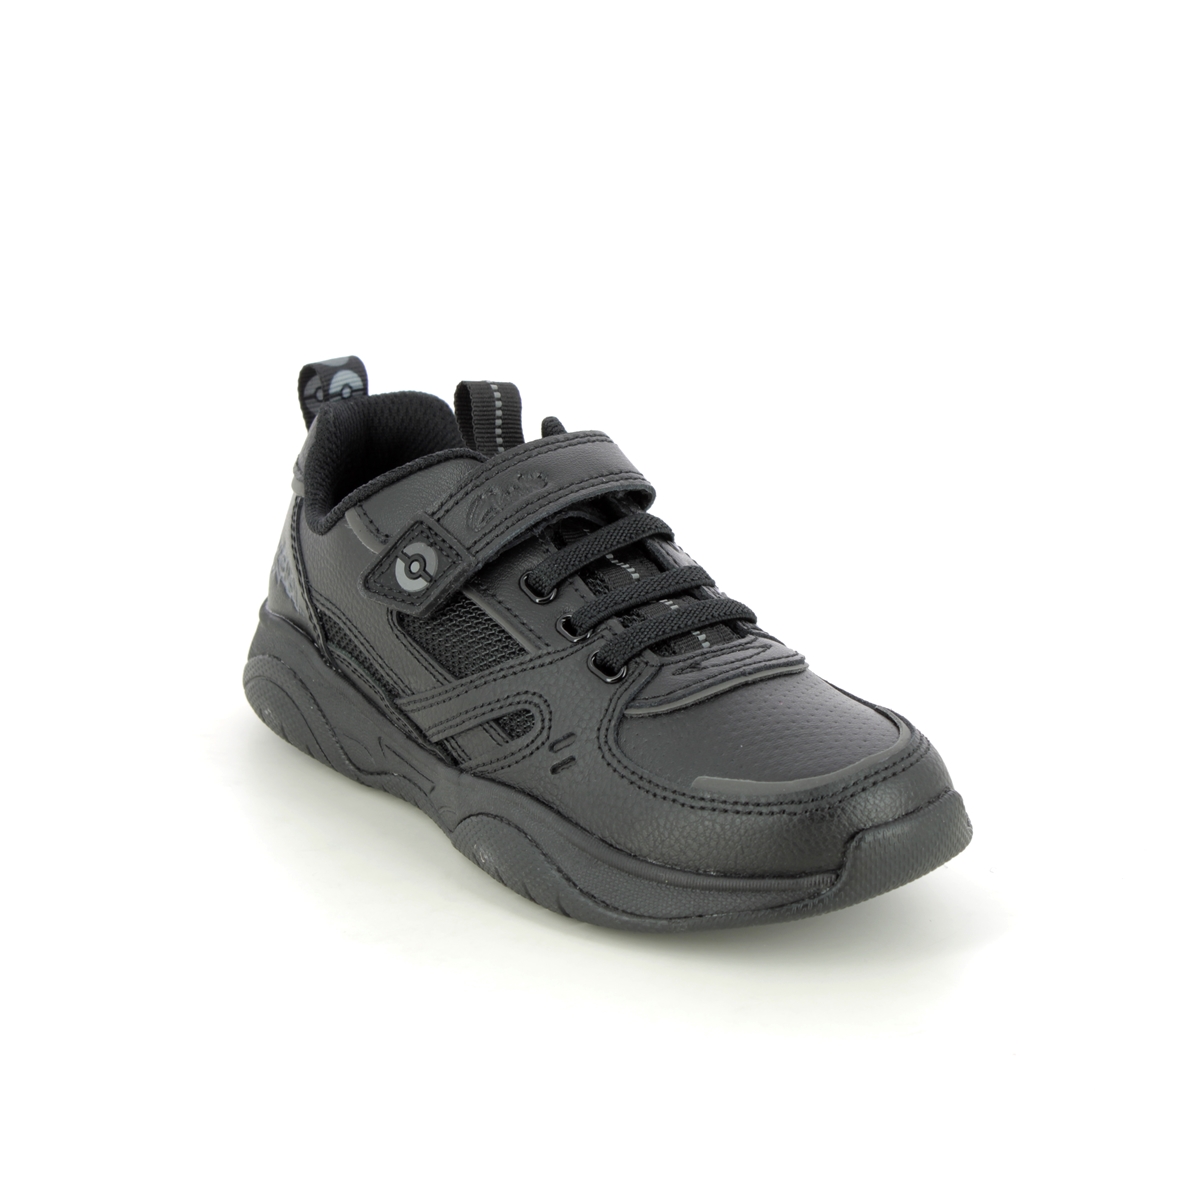 Clarks Pokemon Grip Trade K Black Leather Kids Boys Trainers 693486F In Size 10 In Plain Black Leather F Width Fitting Regular Fit For School For kids